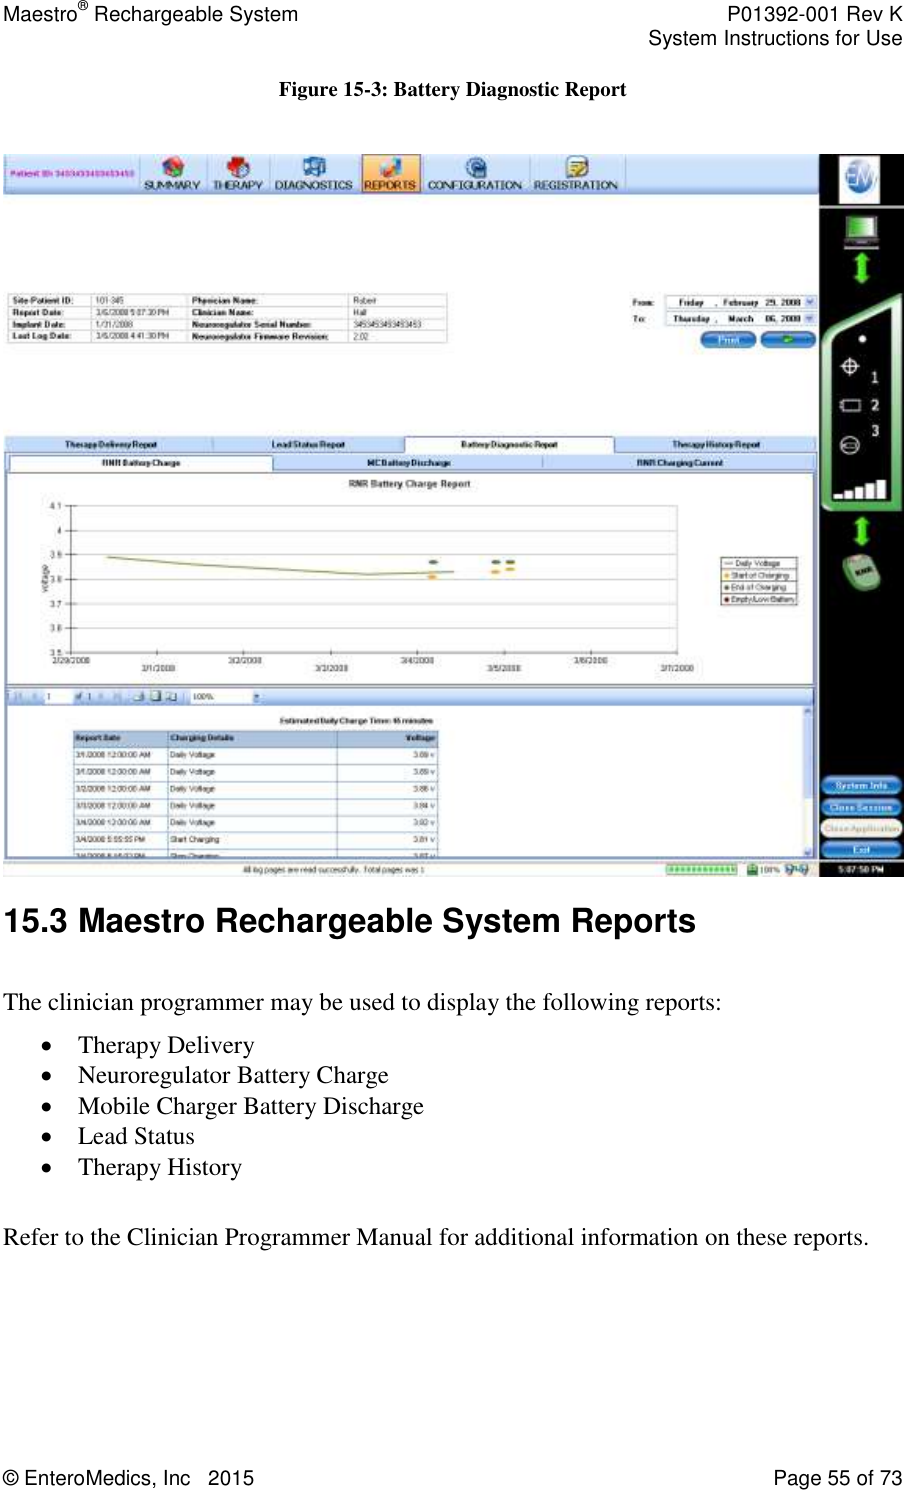 Maestro® Rechargeable System    P01392-001 Rev K     System Instructions for Use  © EnteroMedics, Inc   2015  Page 55 of 73  Figure 15-3: Battery Diagnostic Report   15.3 Maestro Rechargeable System Reports  The clinician programmer may be used to display the following reports:  Therapy Delivery  Neuroregulator Battery Charge  Mobile Charger Battery Discharge  Lead Status  Therapy History  Refer to the Clinician Programmer Manual for additional information on these reports.  